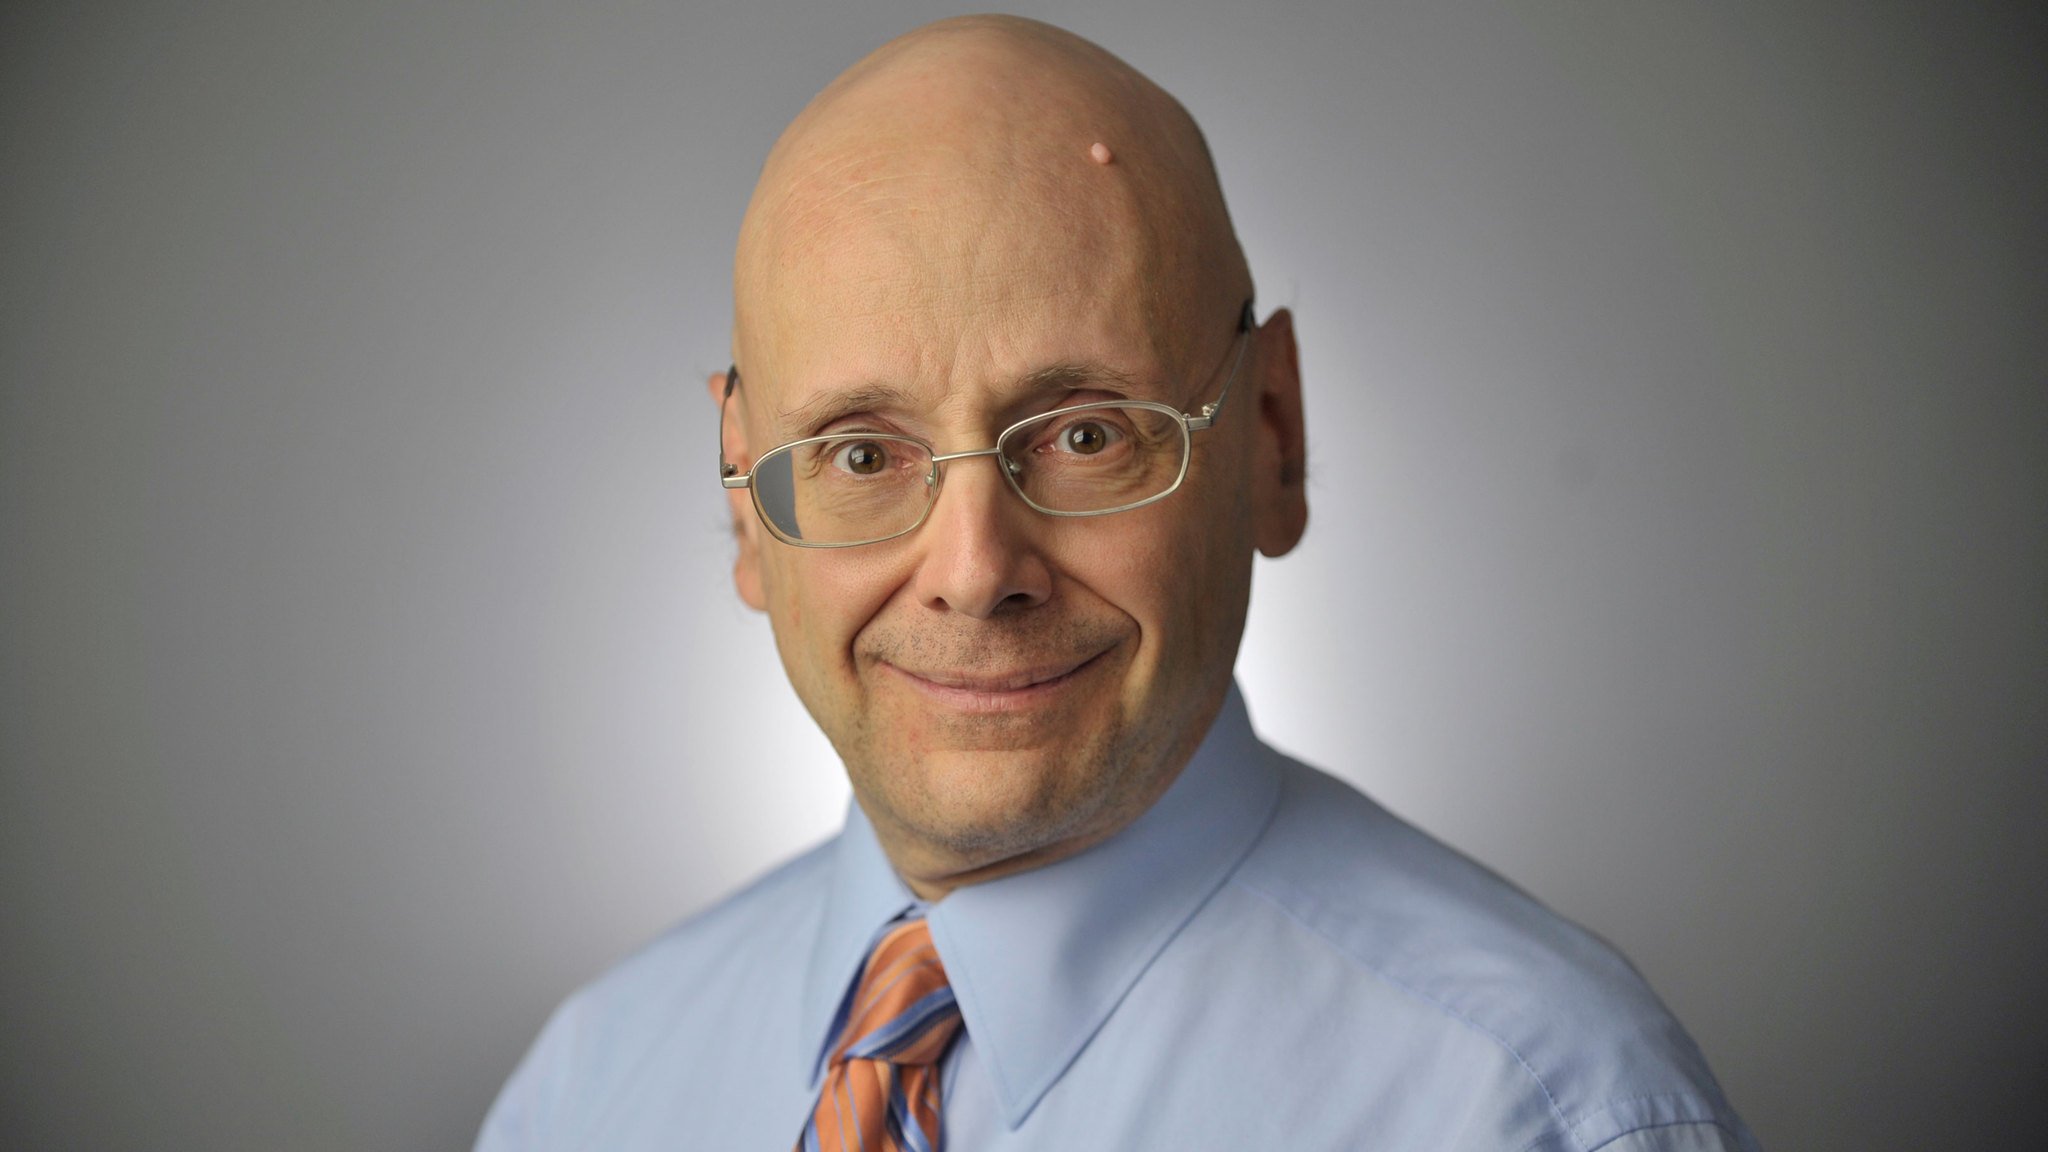 This image obtained from the Capital Gazette shows Capital Gazette Editorial Page Editor Gerald Fischman, one of the victims of the June 28, 2018, shooting at the newspaper in Annapolis, Maryland.